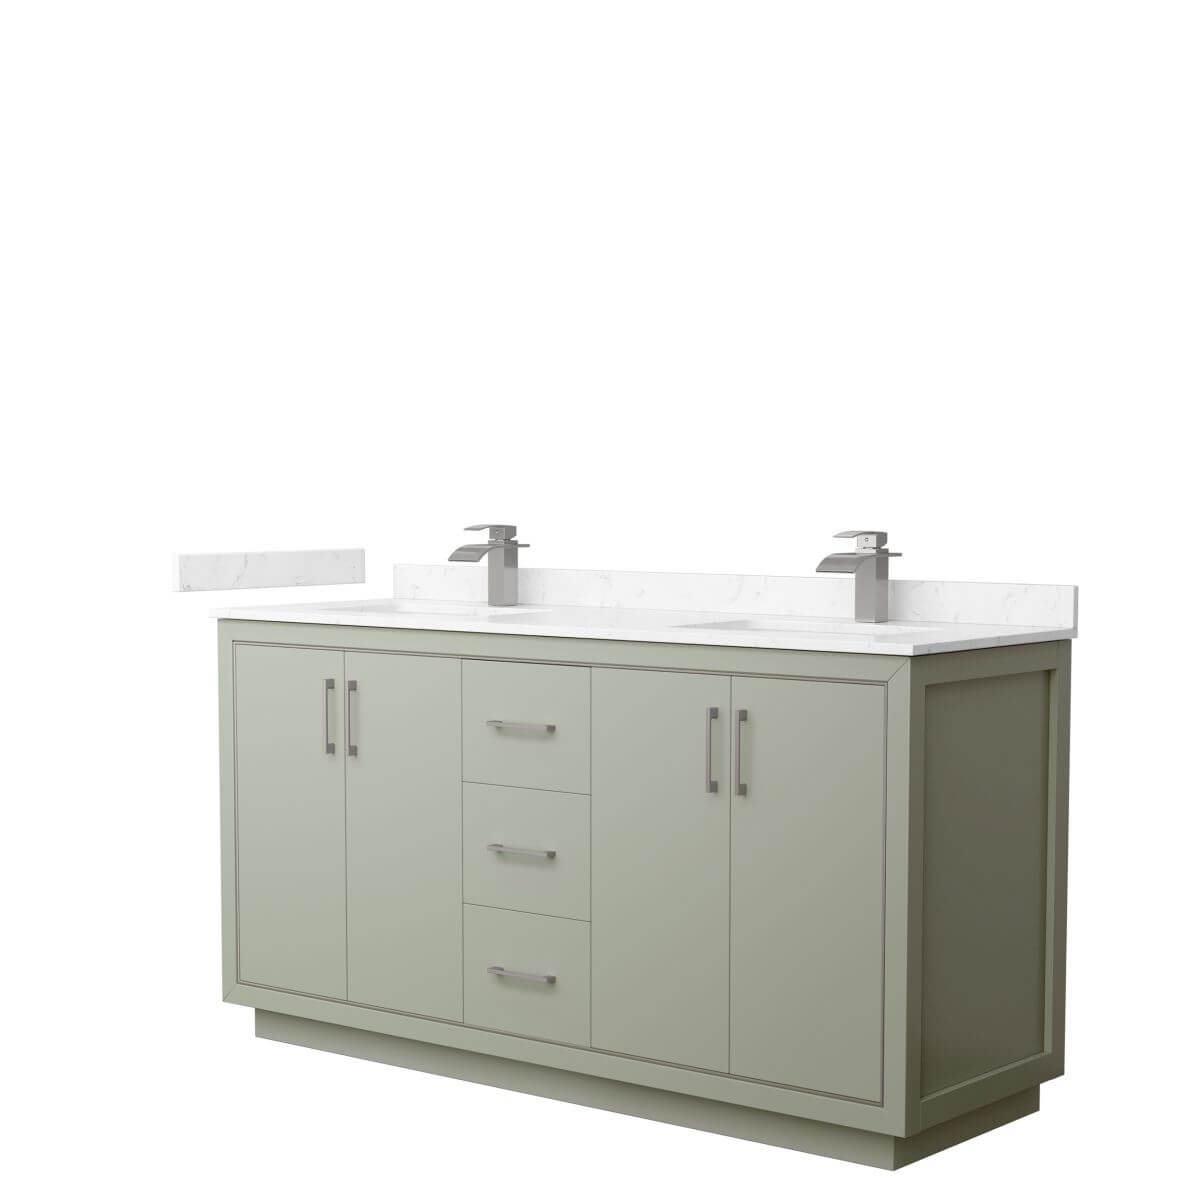 Wyndham Collection WCF111166DLGC2UNSMXX Icon 66 inch Double Bathroom Vanity in Light Green with Carrara Cultured Marble Countertop, Undermount Square Sinks and Brushed Nickel Trim